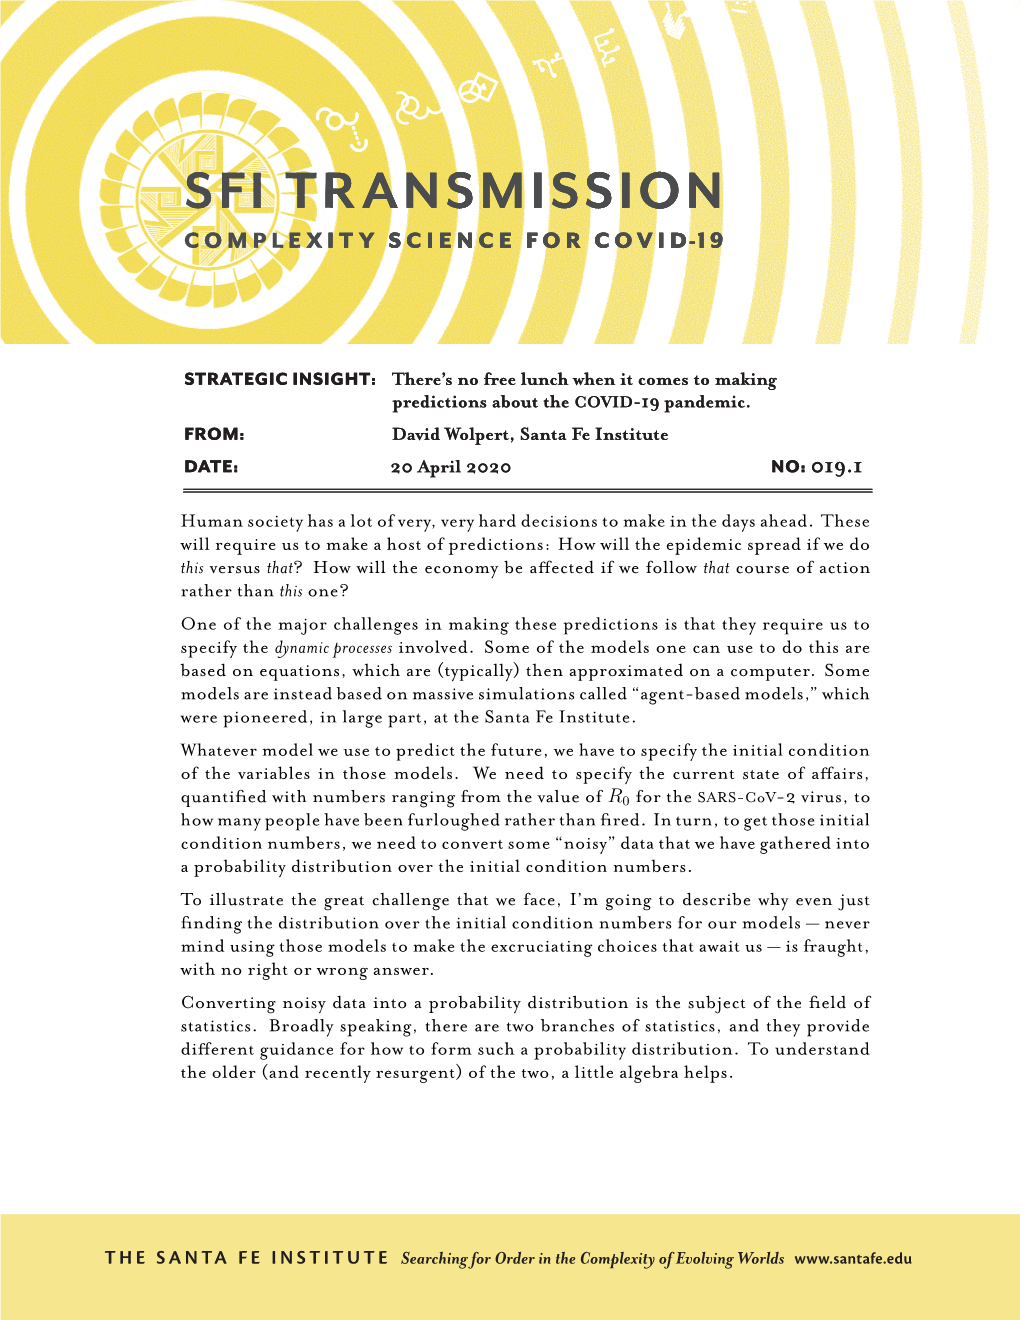 Sfi Transmission Complexity Science for Covid-19